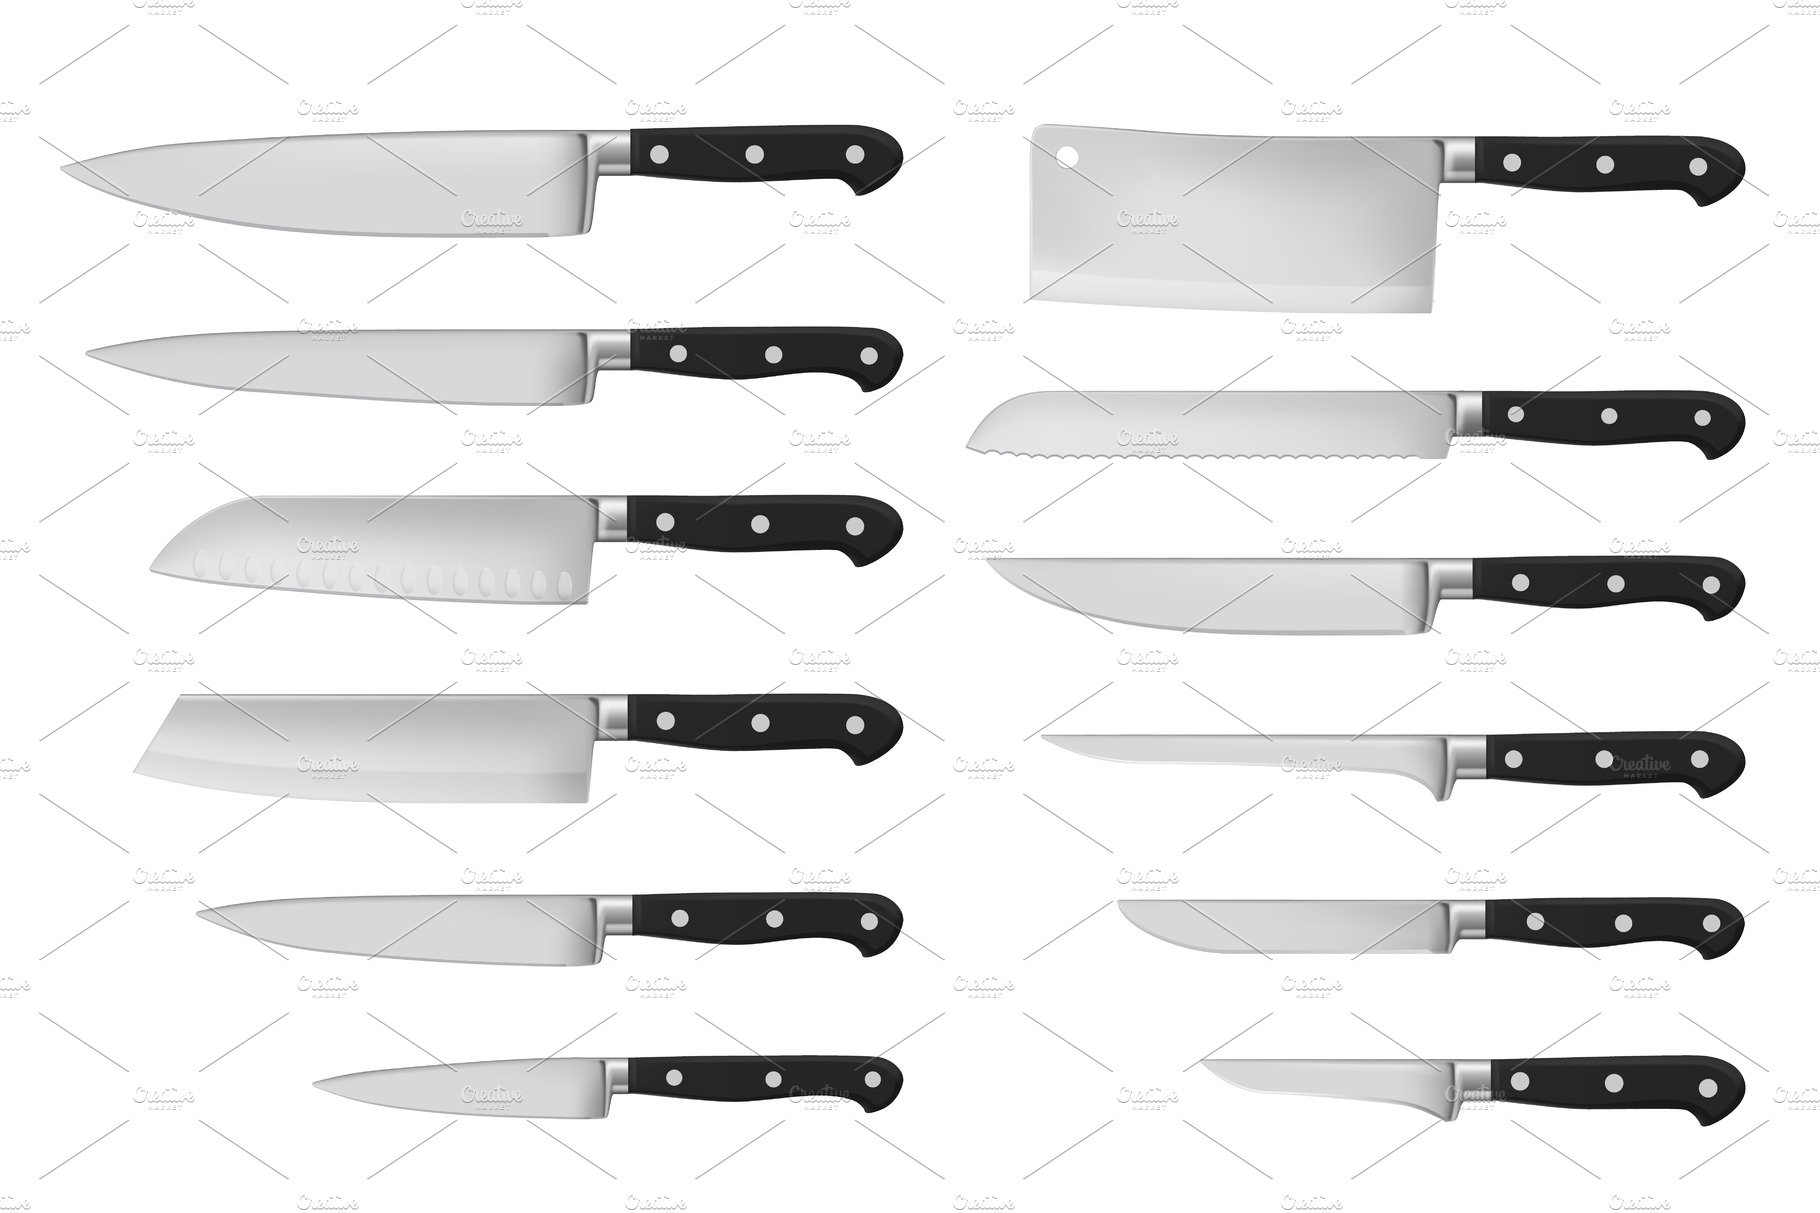 Kitchen and meat cutting knives cover image.